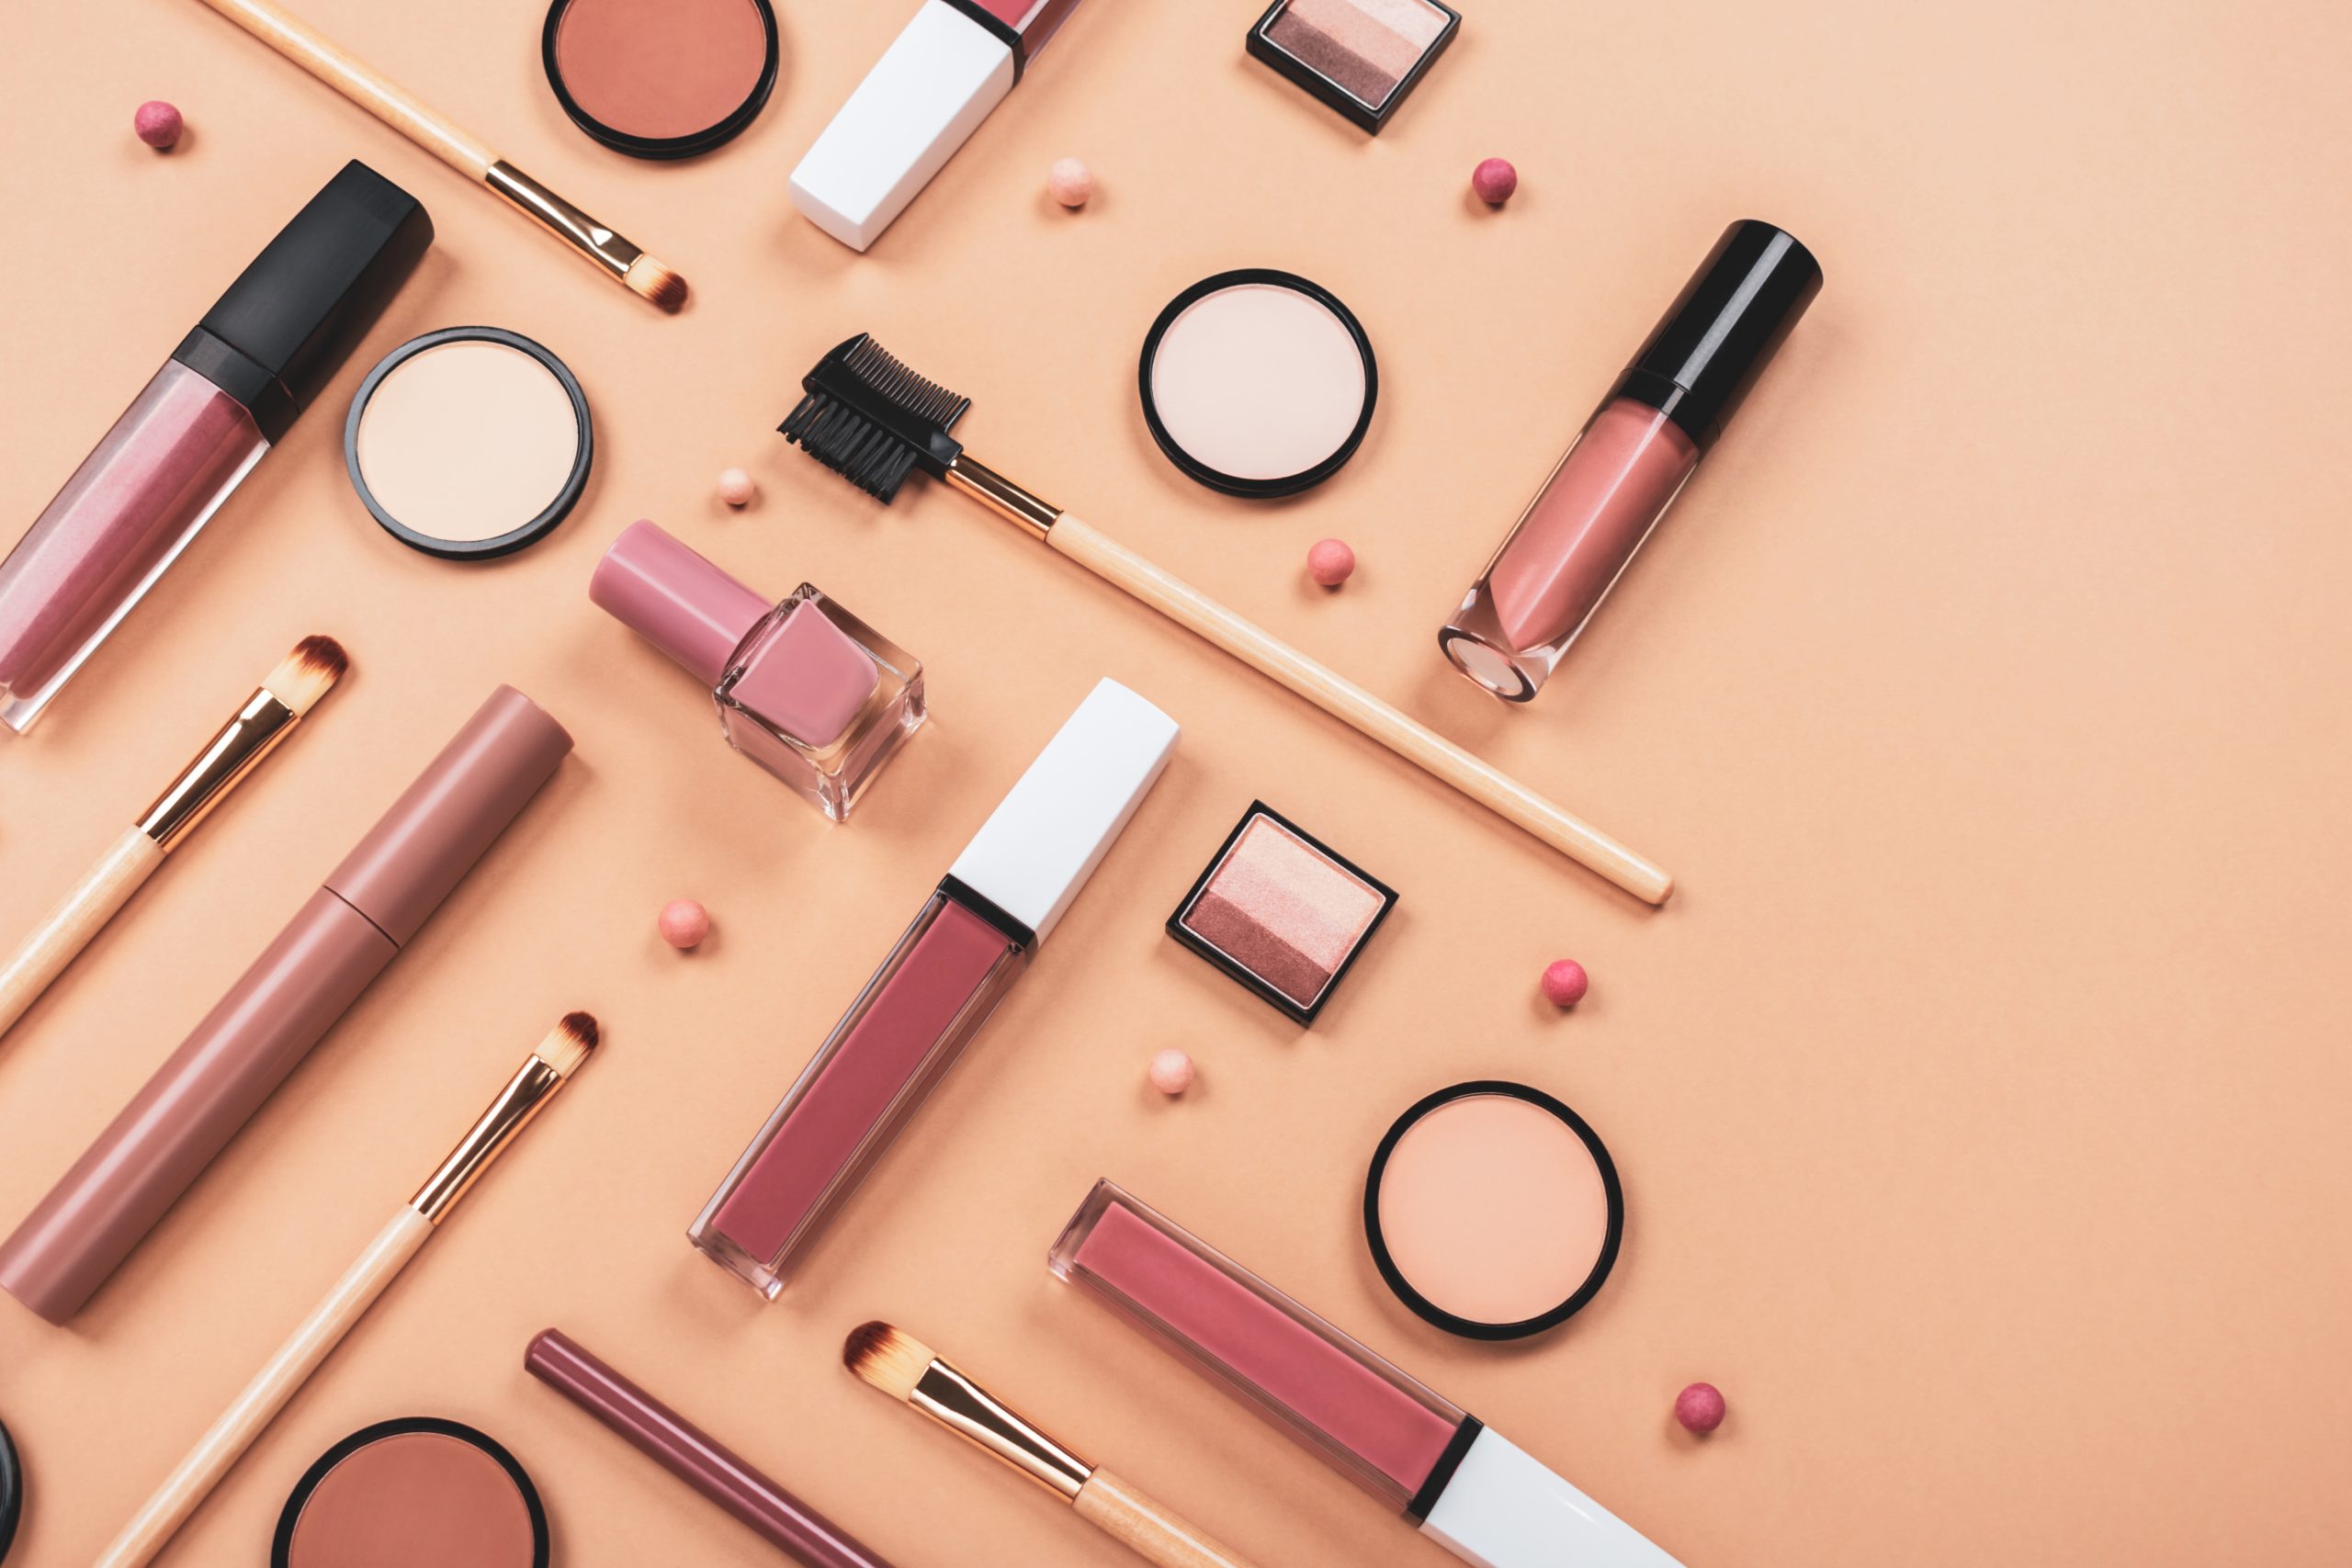 Could Makeup Products Have Age Limits?